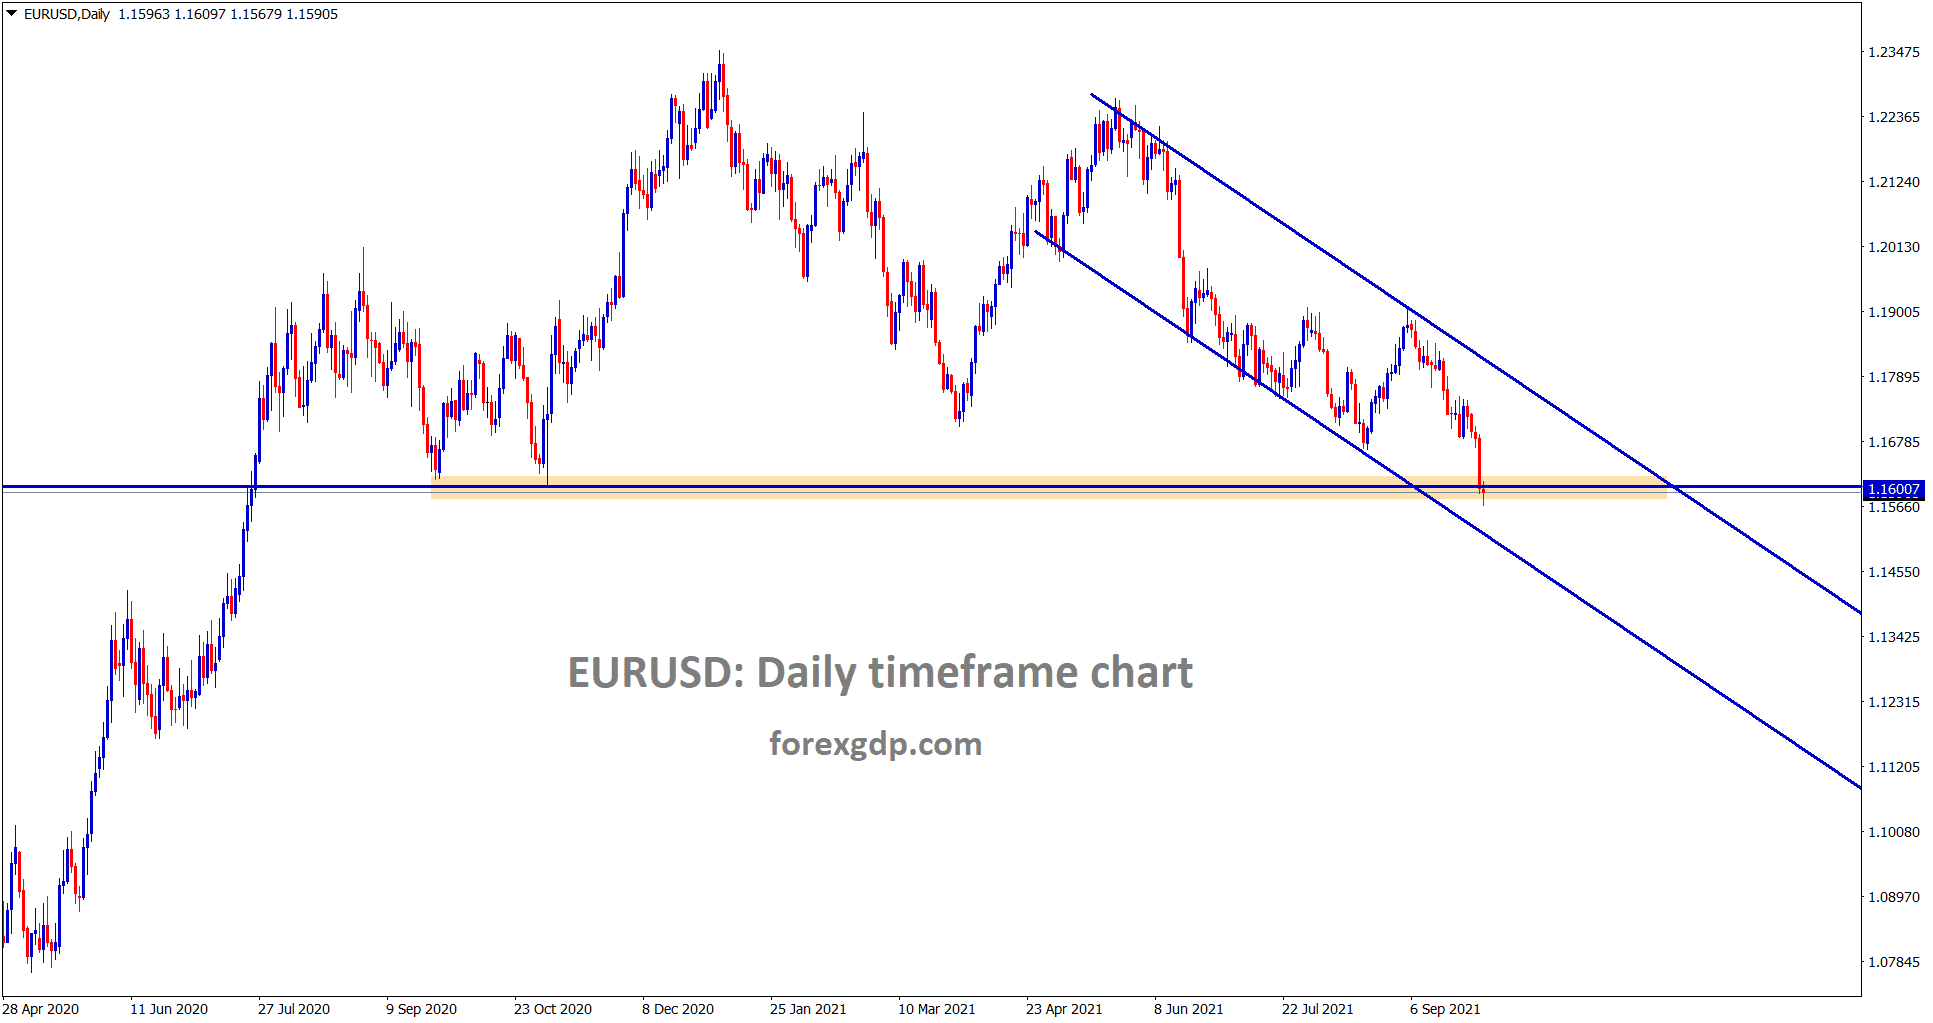 EURUSD is still standing at the important support area